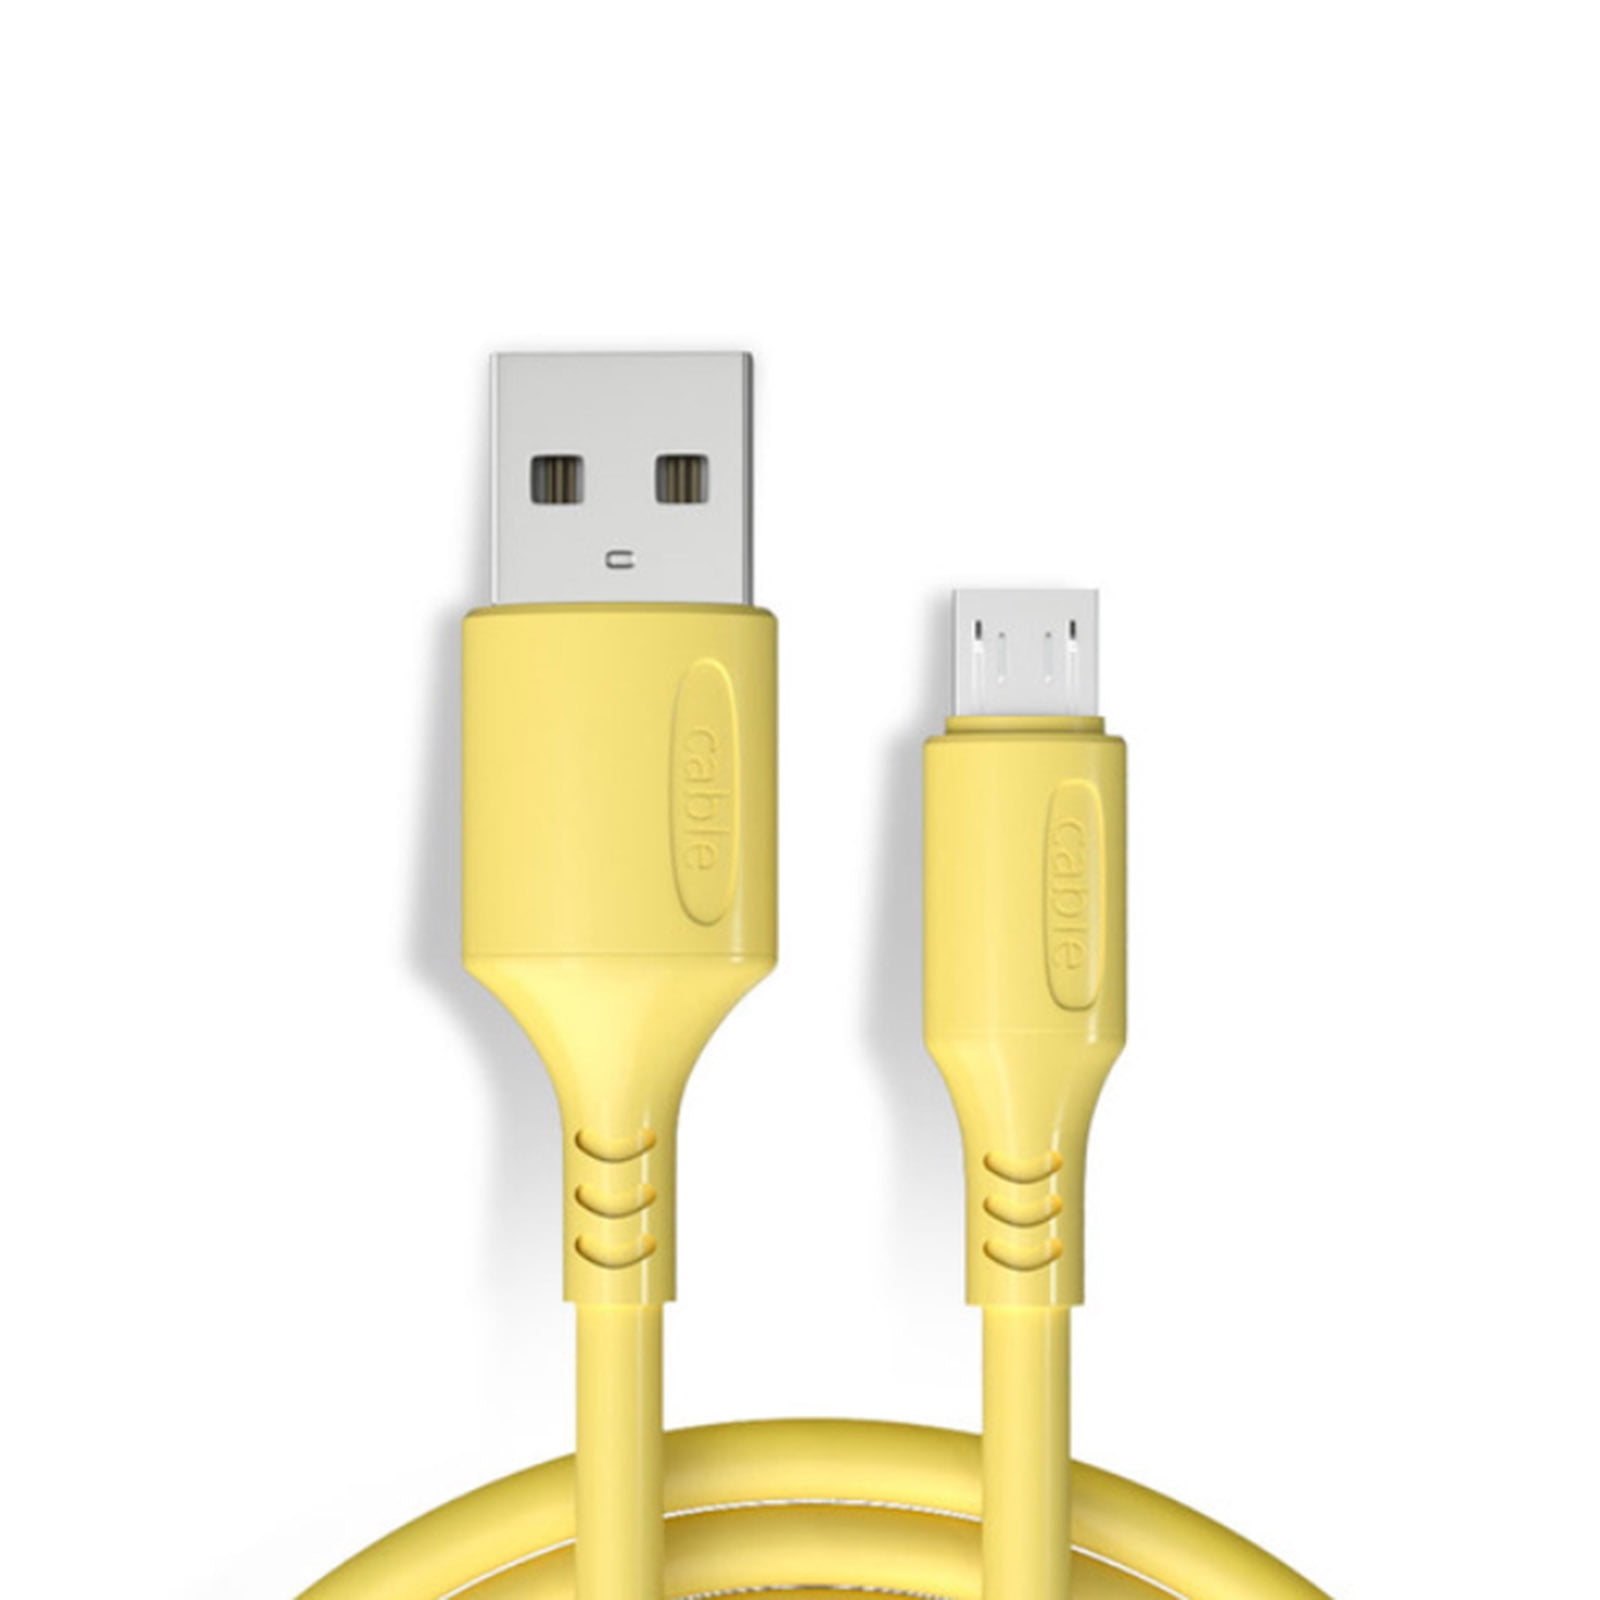 MicroUSB Cable Micro USB to USB 2.0 3A Fast Charging Cable Durable Cord for Android Mobile Phones Yellow